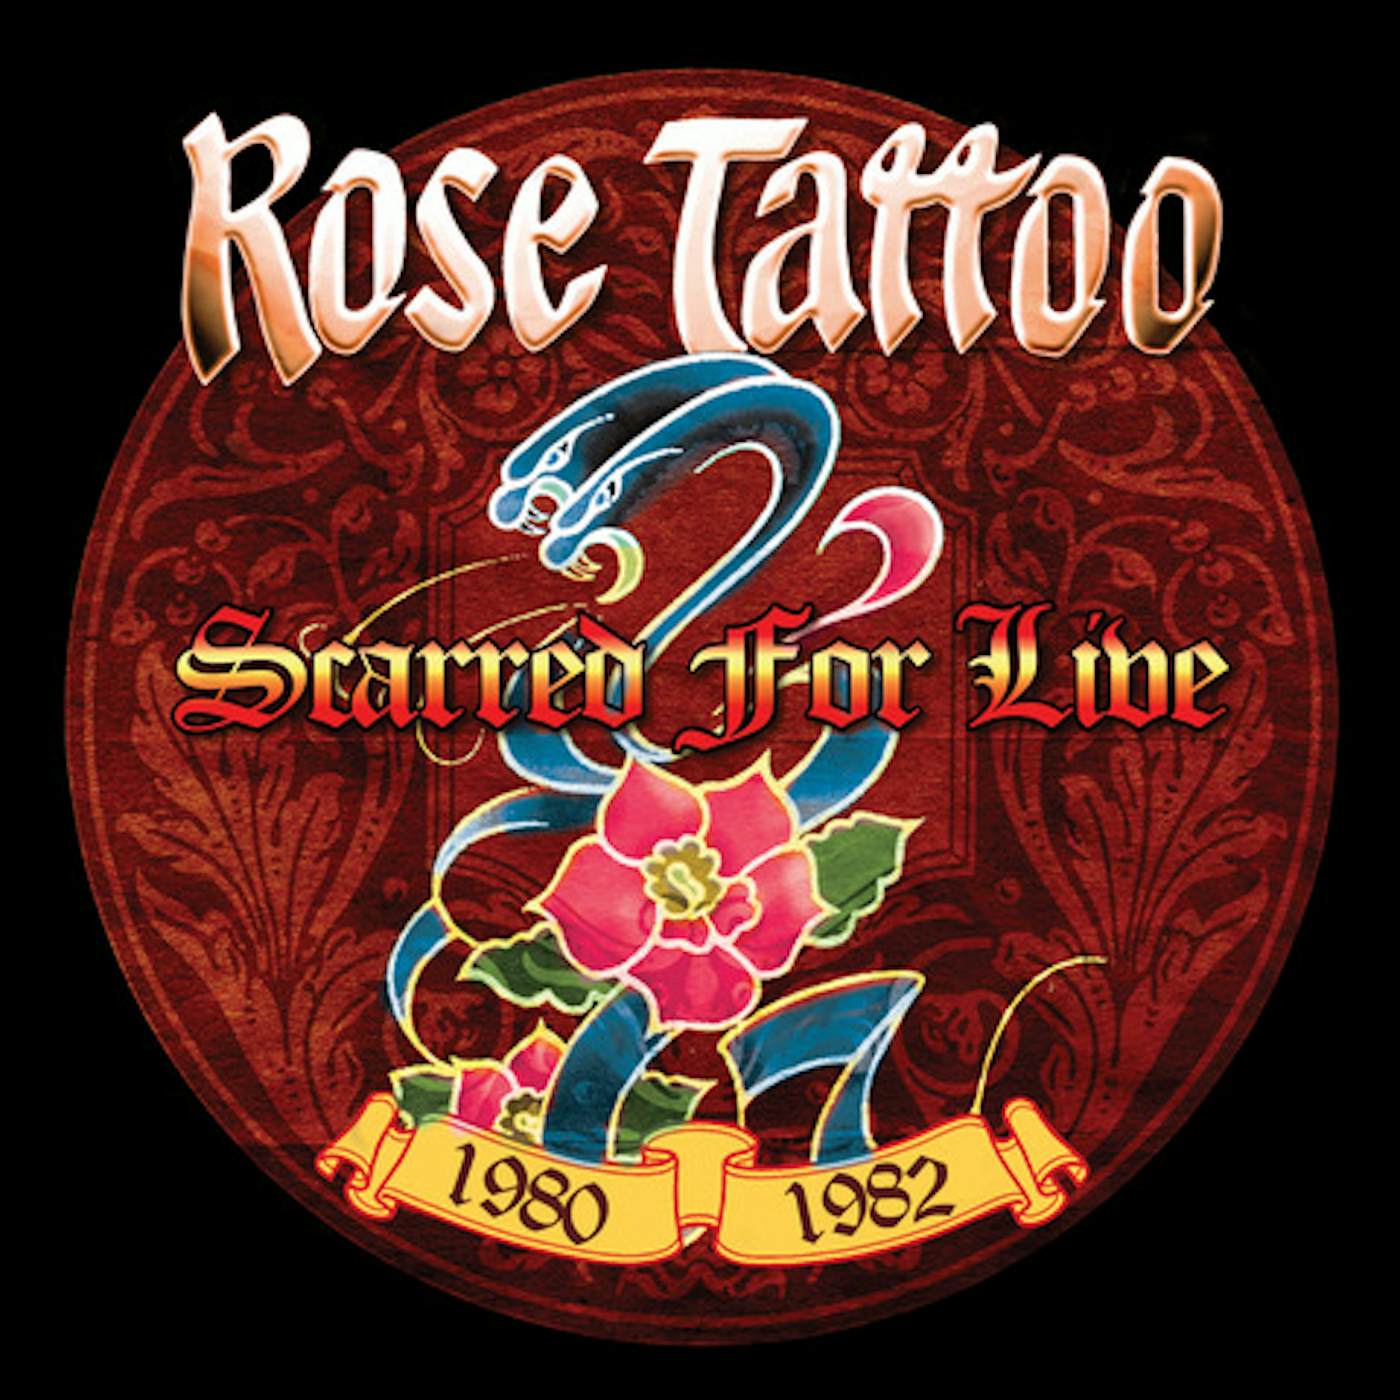 Rose Tattoo SCARRED FOR LIVE 1980-1982 CD